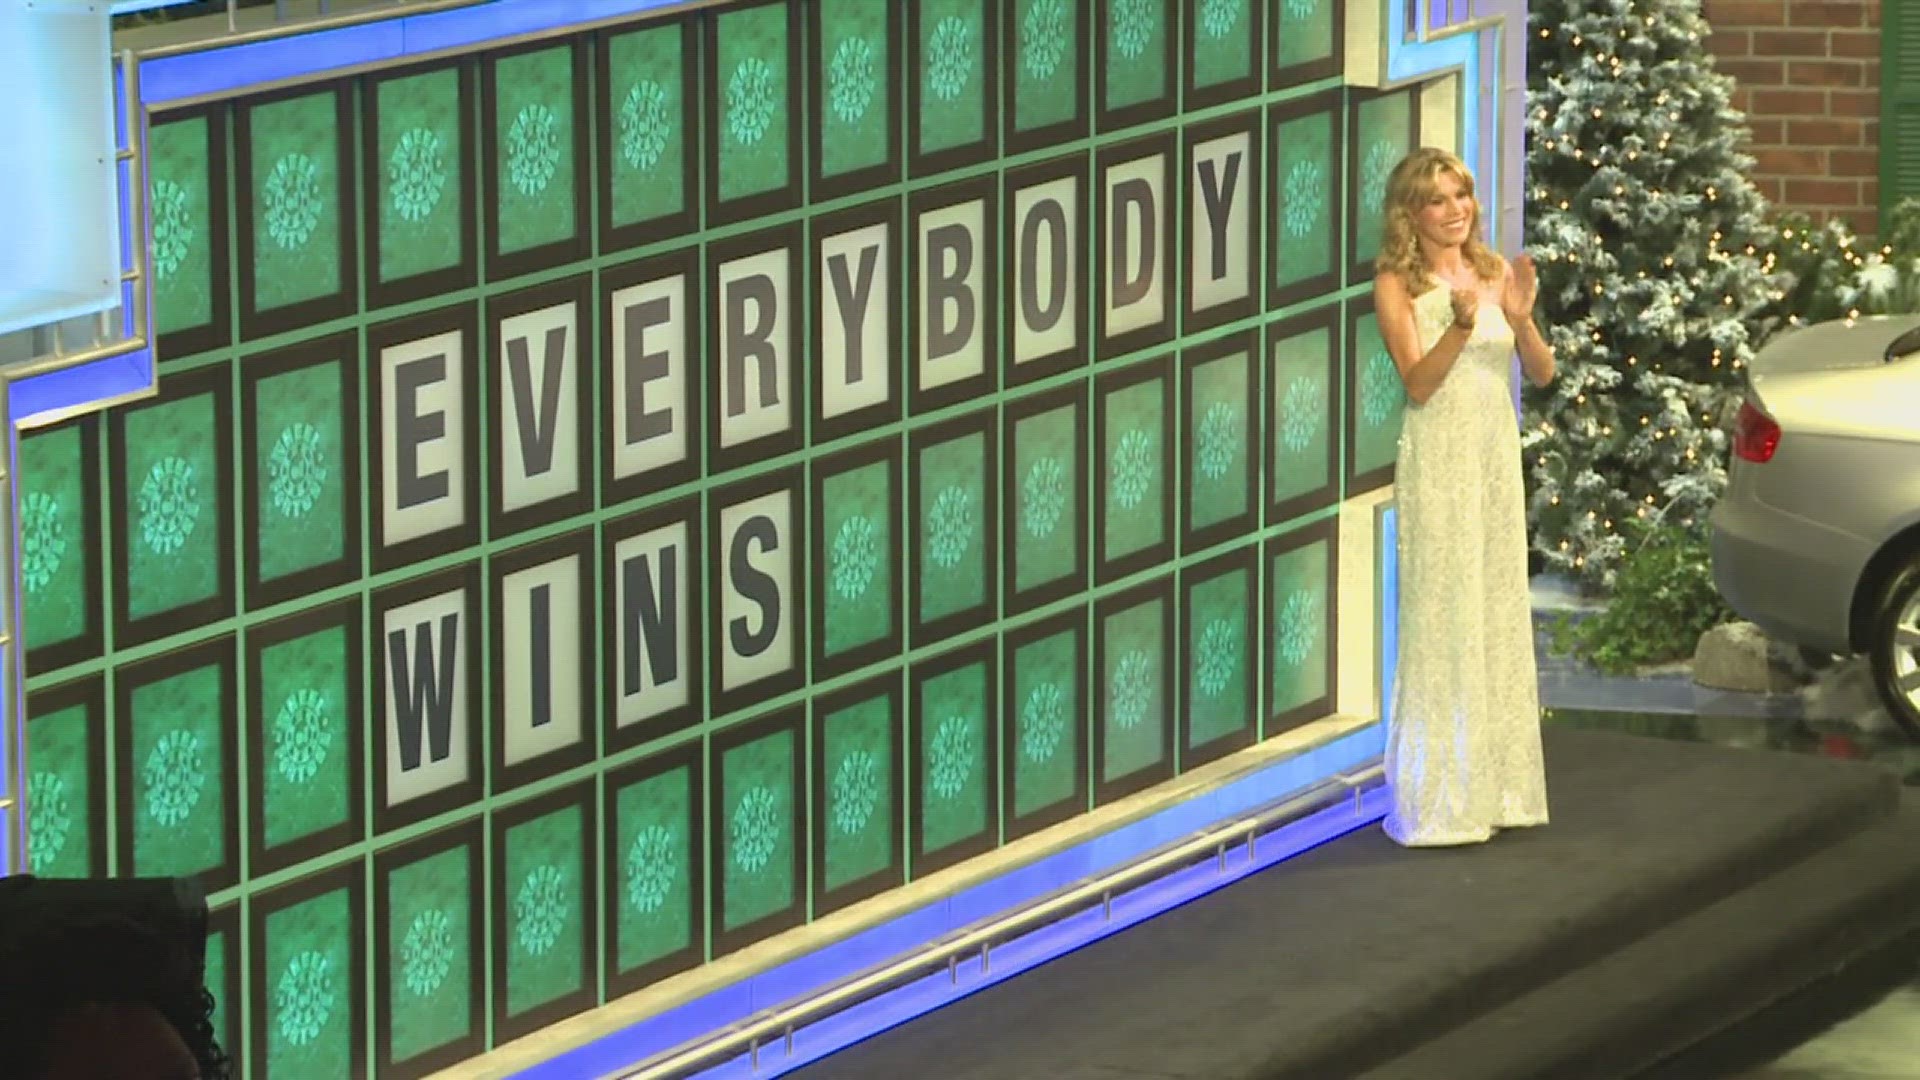 Vanna White claims she is making a fifth of what Pat Sajak makes. She is fighting to get at least half of Sajak's salary.